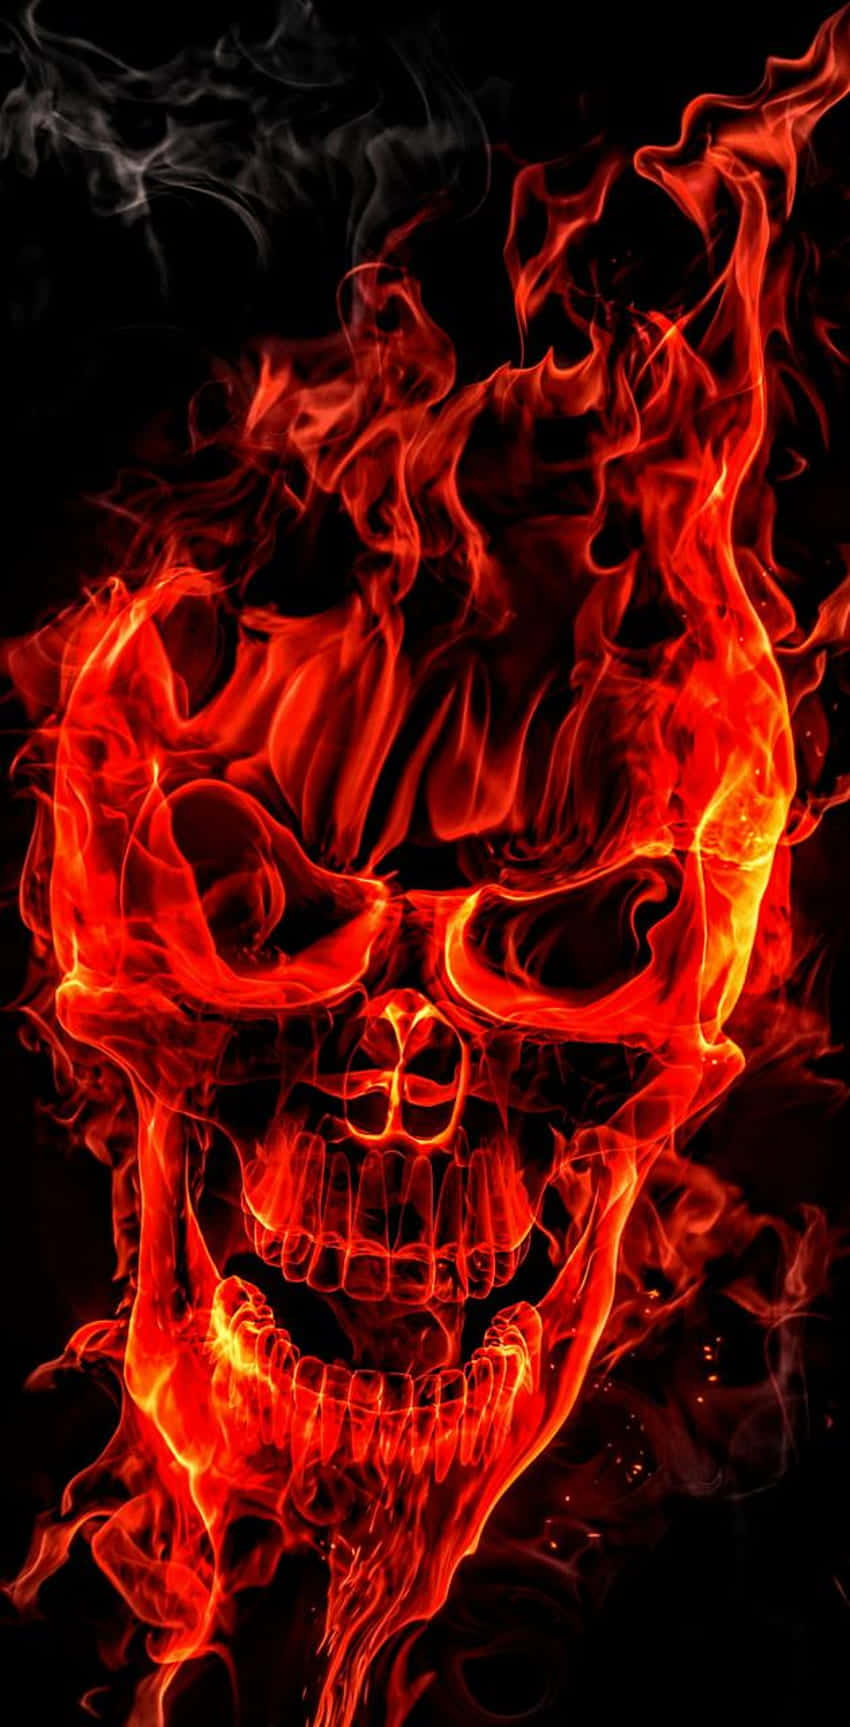 A Flaming Skull Fills the Dark with an Eerie Red Glow Wallpaper